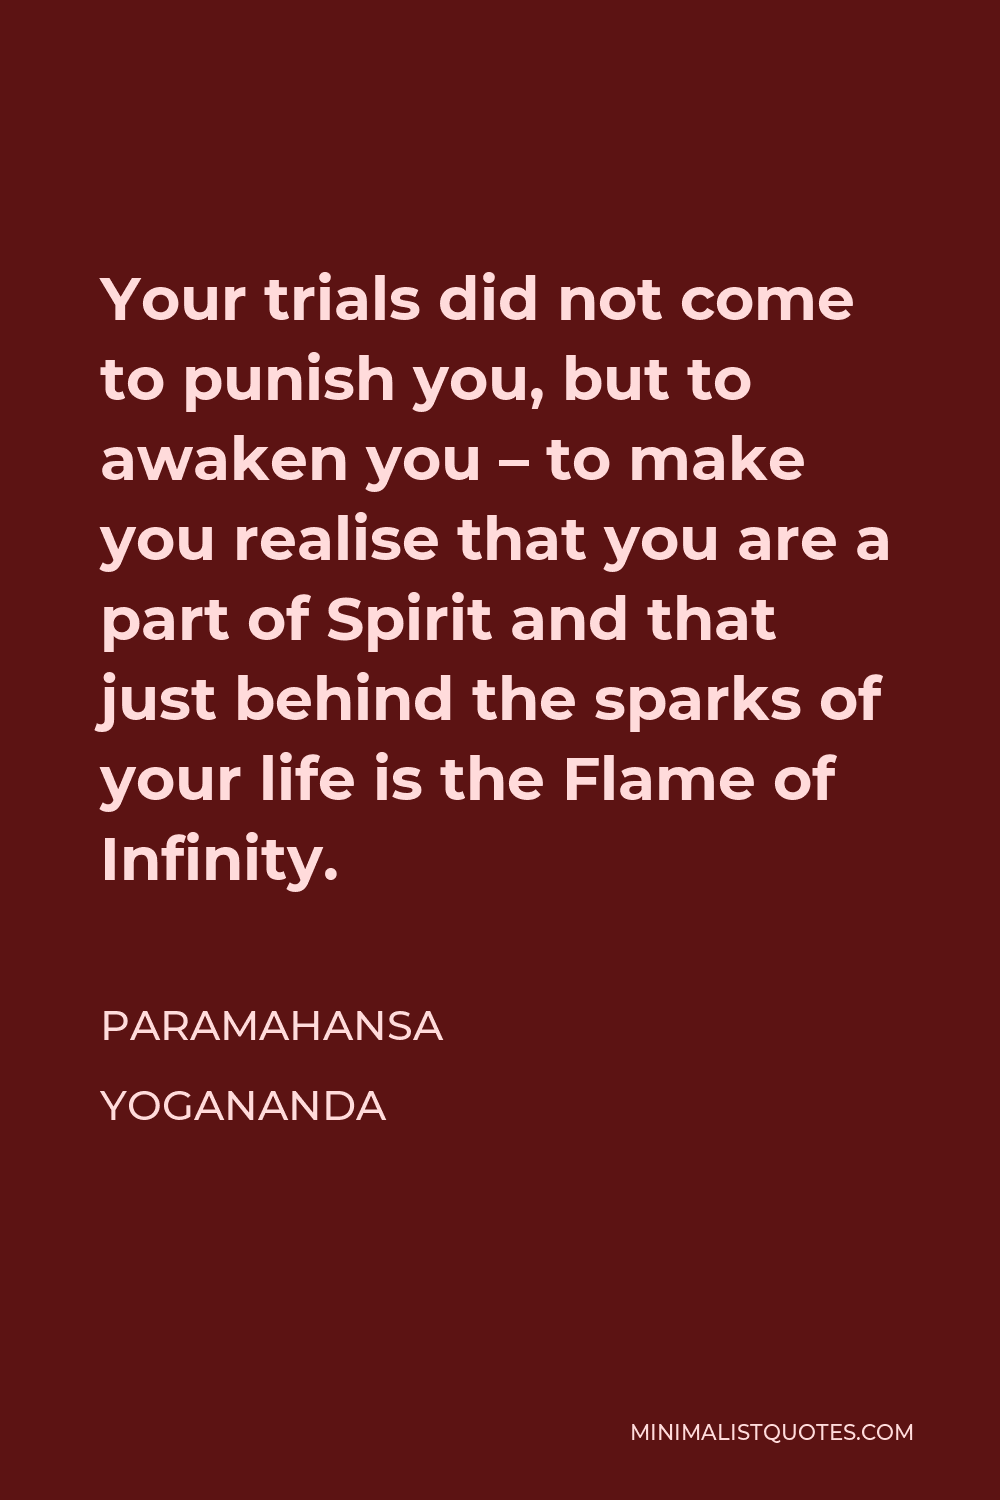 Paramahansa Yogananda Quote - Your trials did not come to punish you, but to awaken you – to make you realise that you are a part of Spirit and that just behind the sparks of your life is the Flame of Infinity.